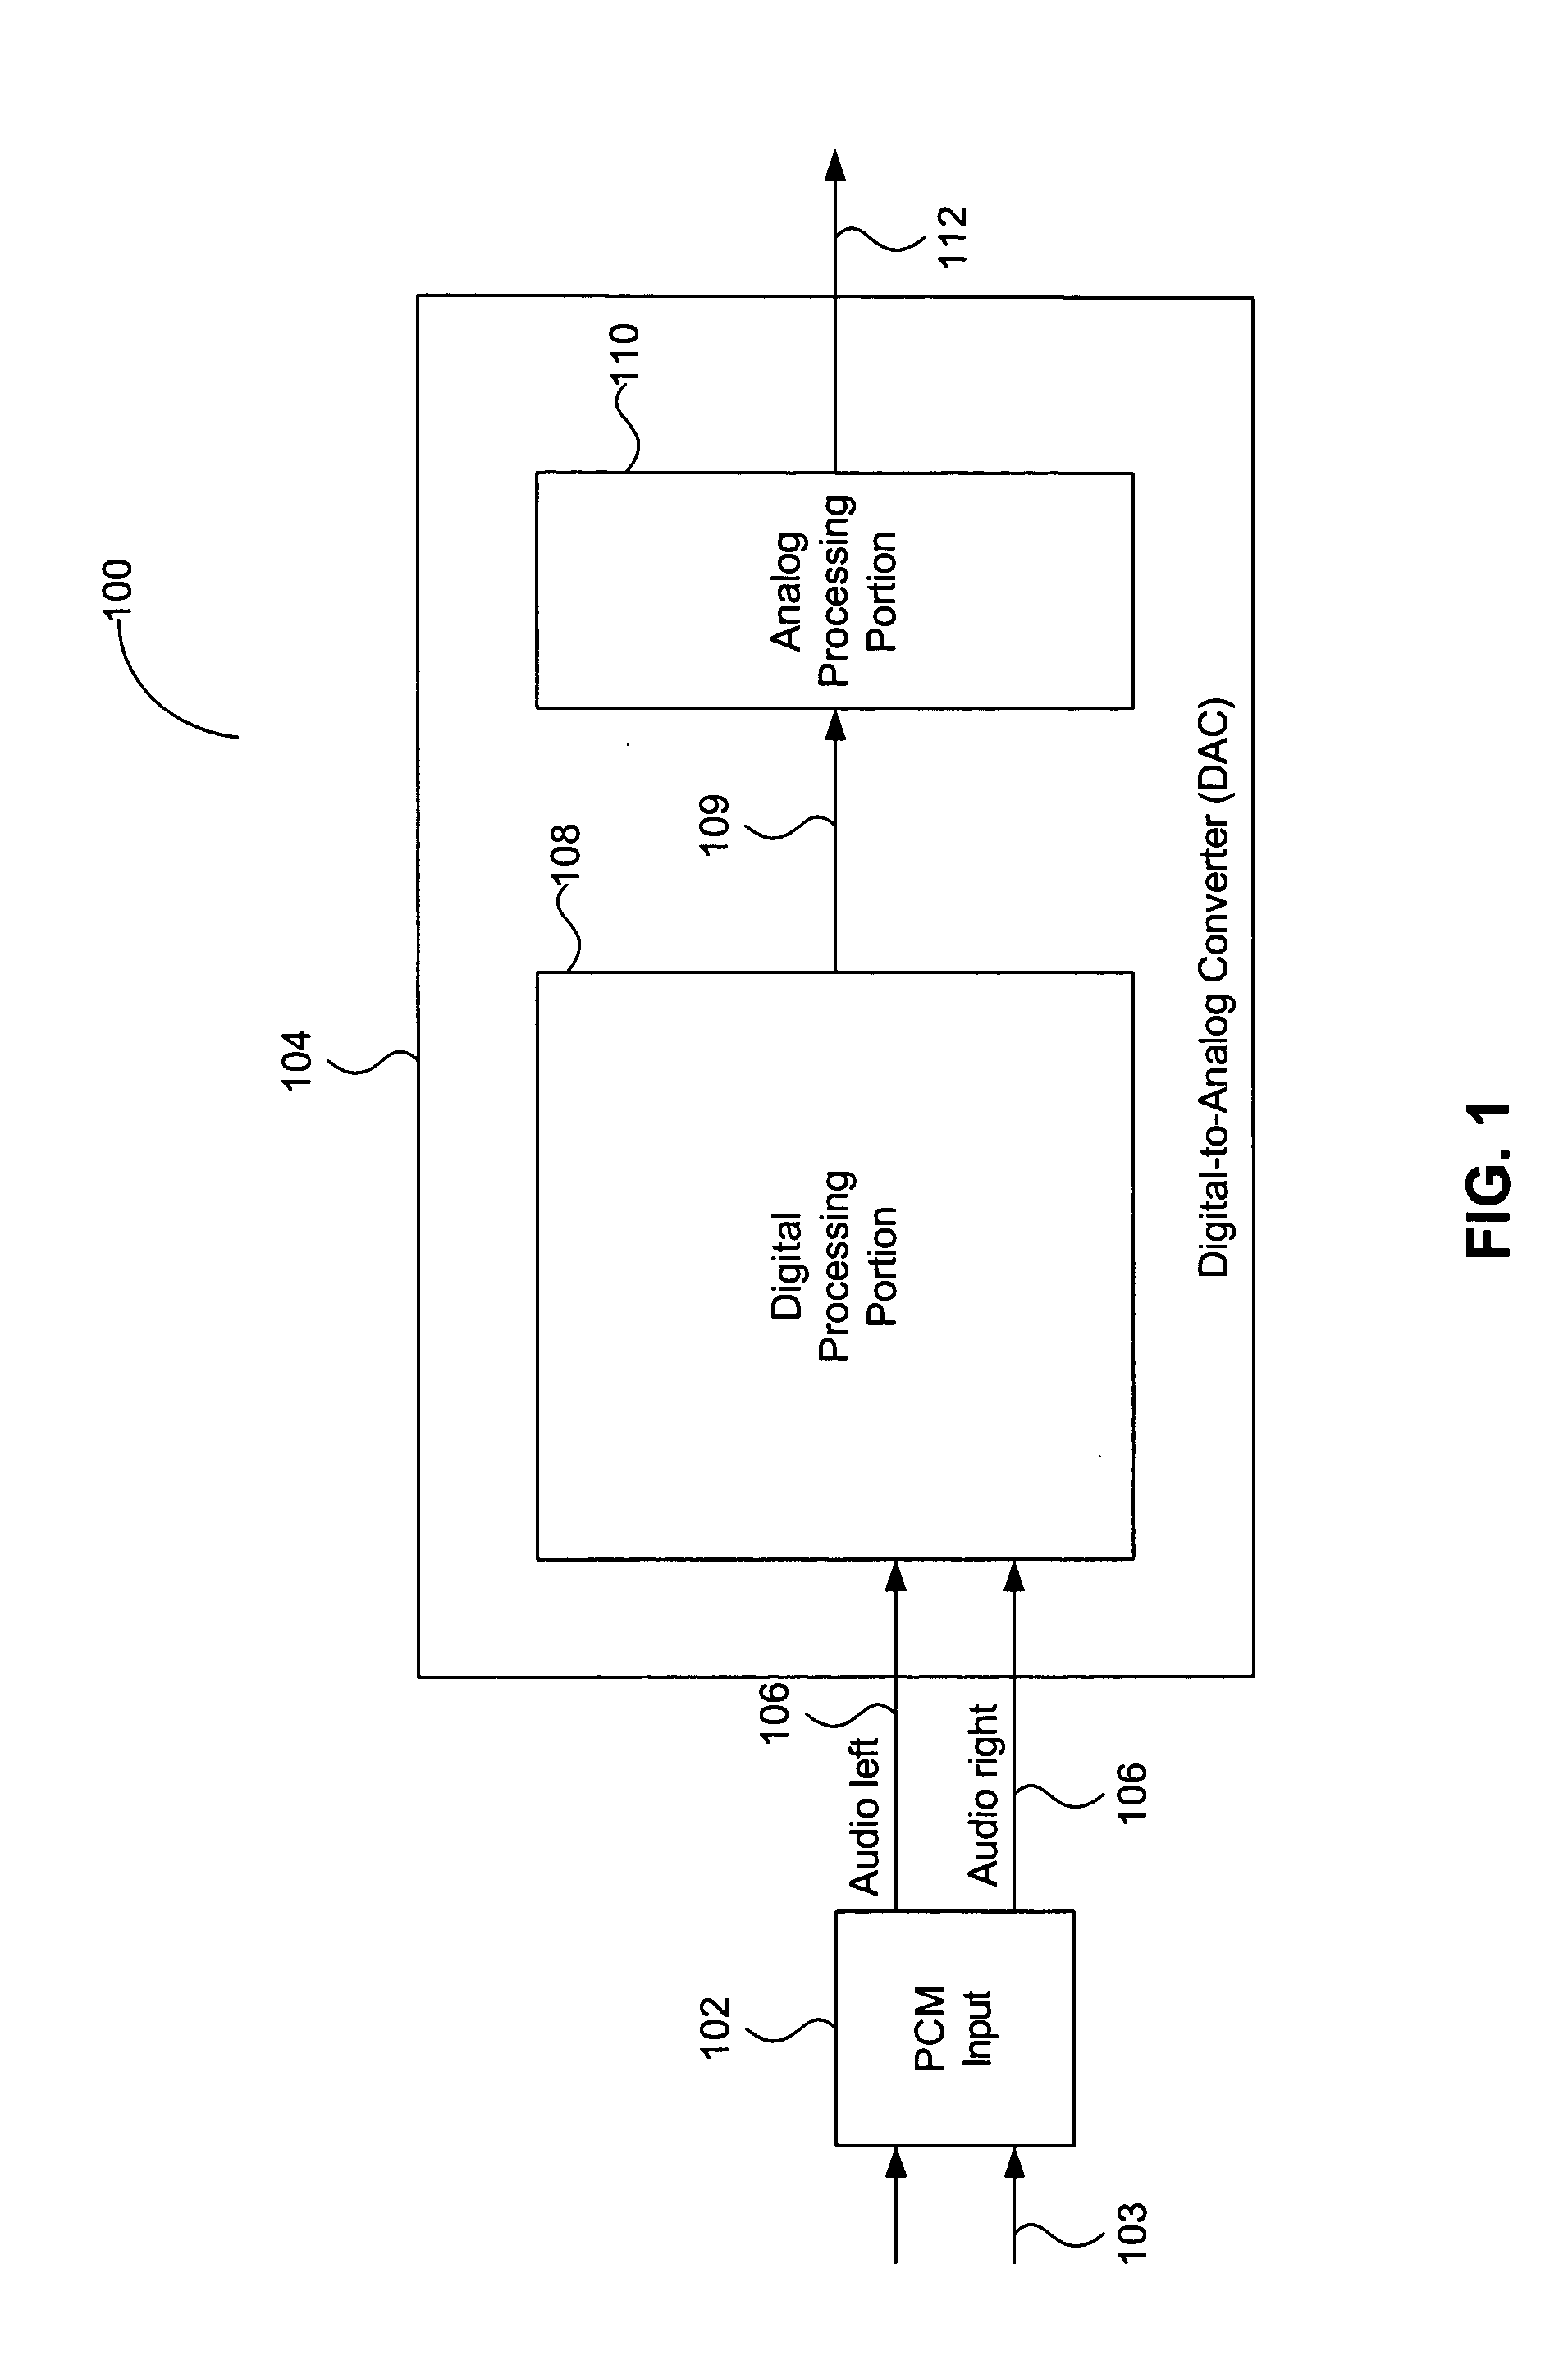 Method and system for converting digital samples to an analog signal